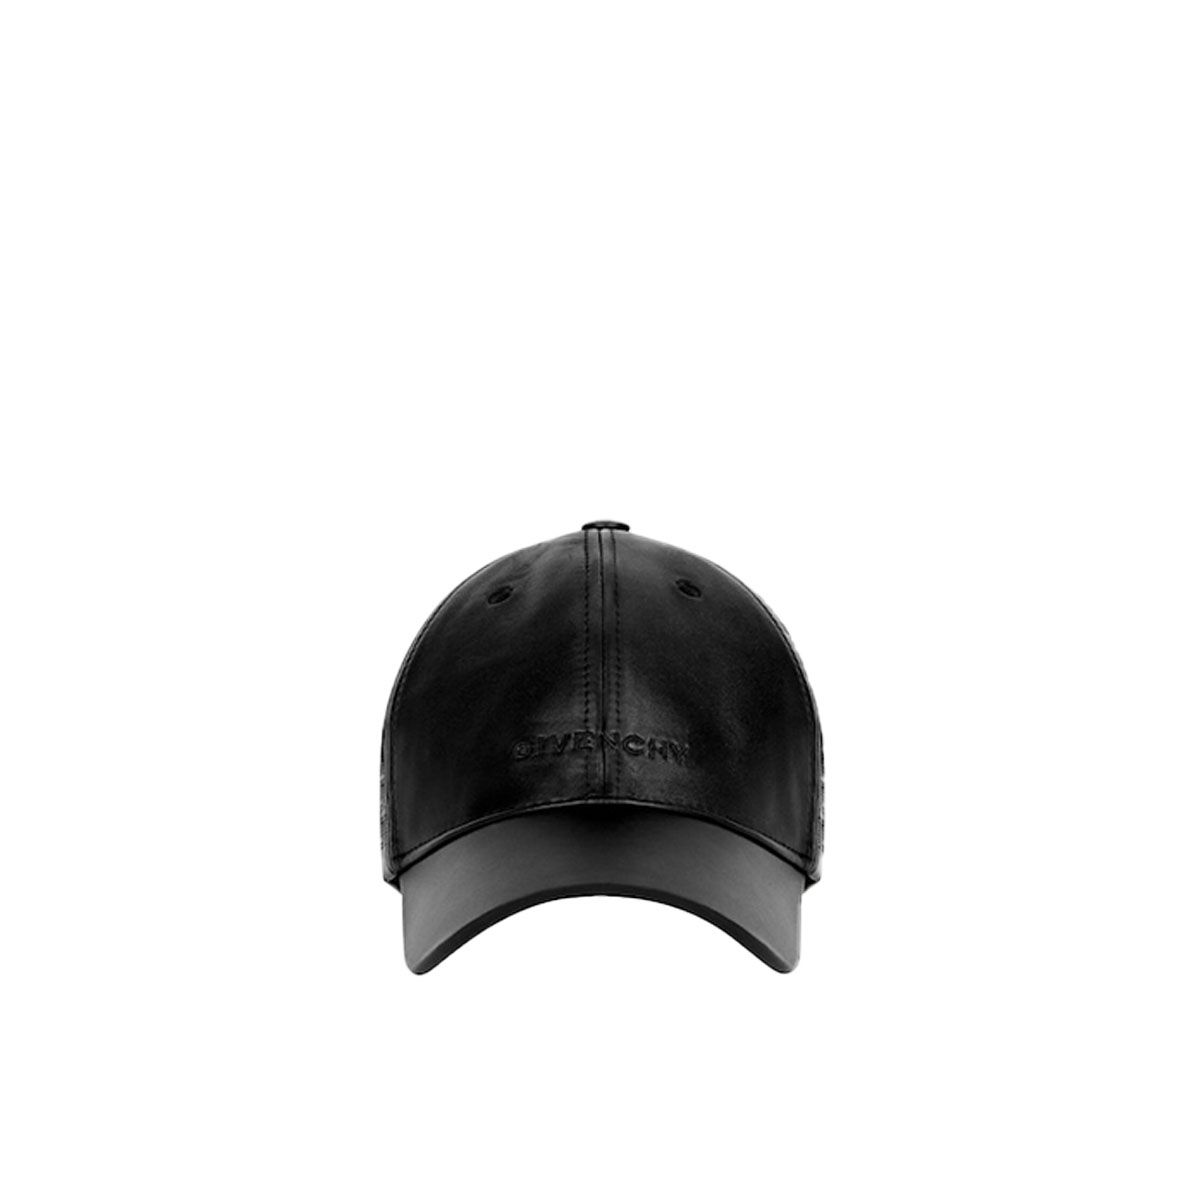 4G Perforated Leather Cap